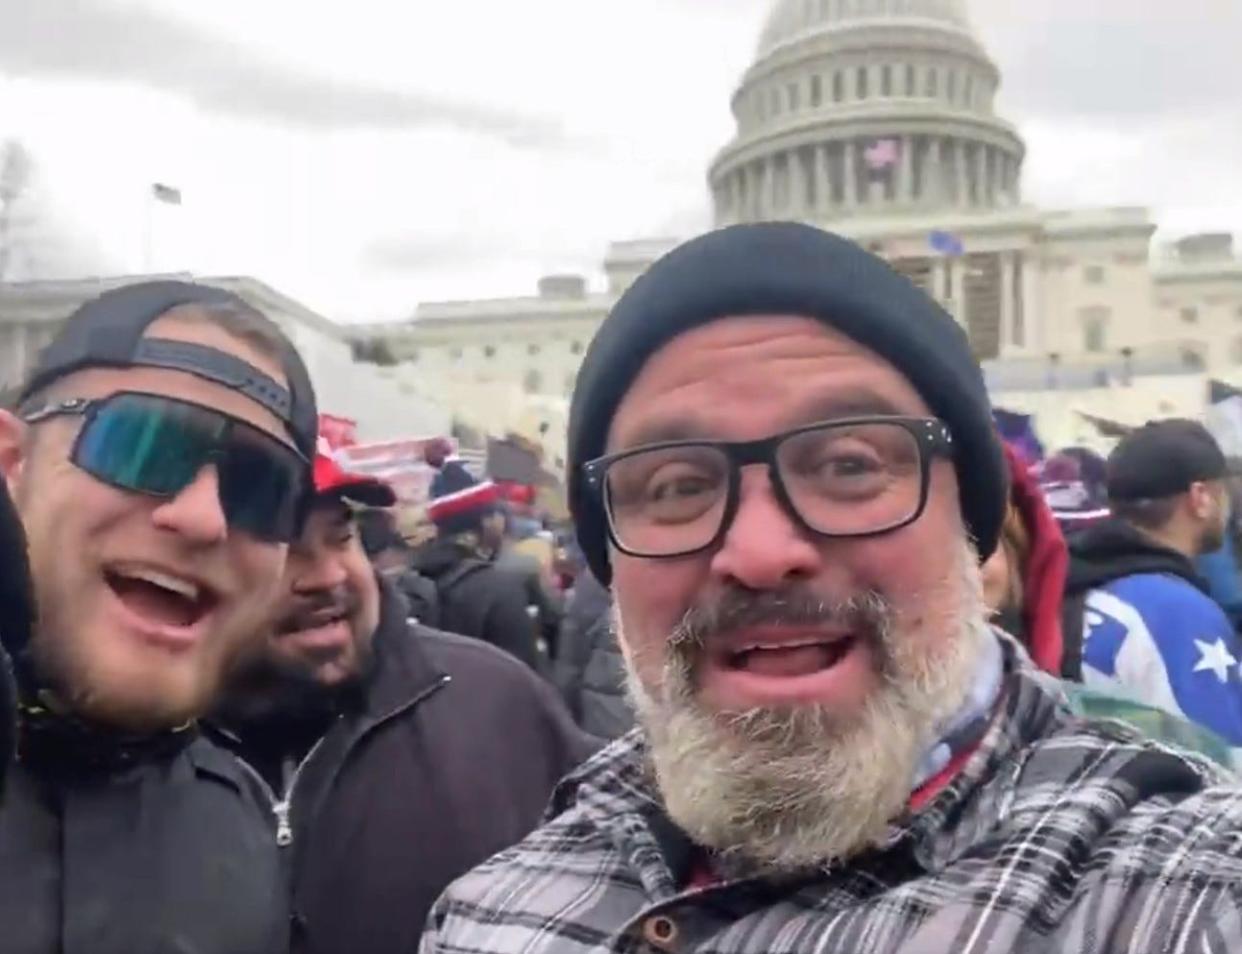 Joe Biggs celebrates following the Jan. 6, 2021, riot at the U.S. Capitol, where Congress was voting to certify the 2020 election.